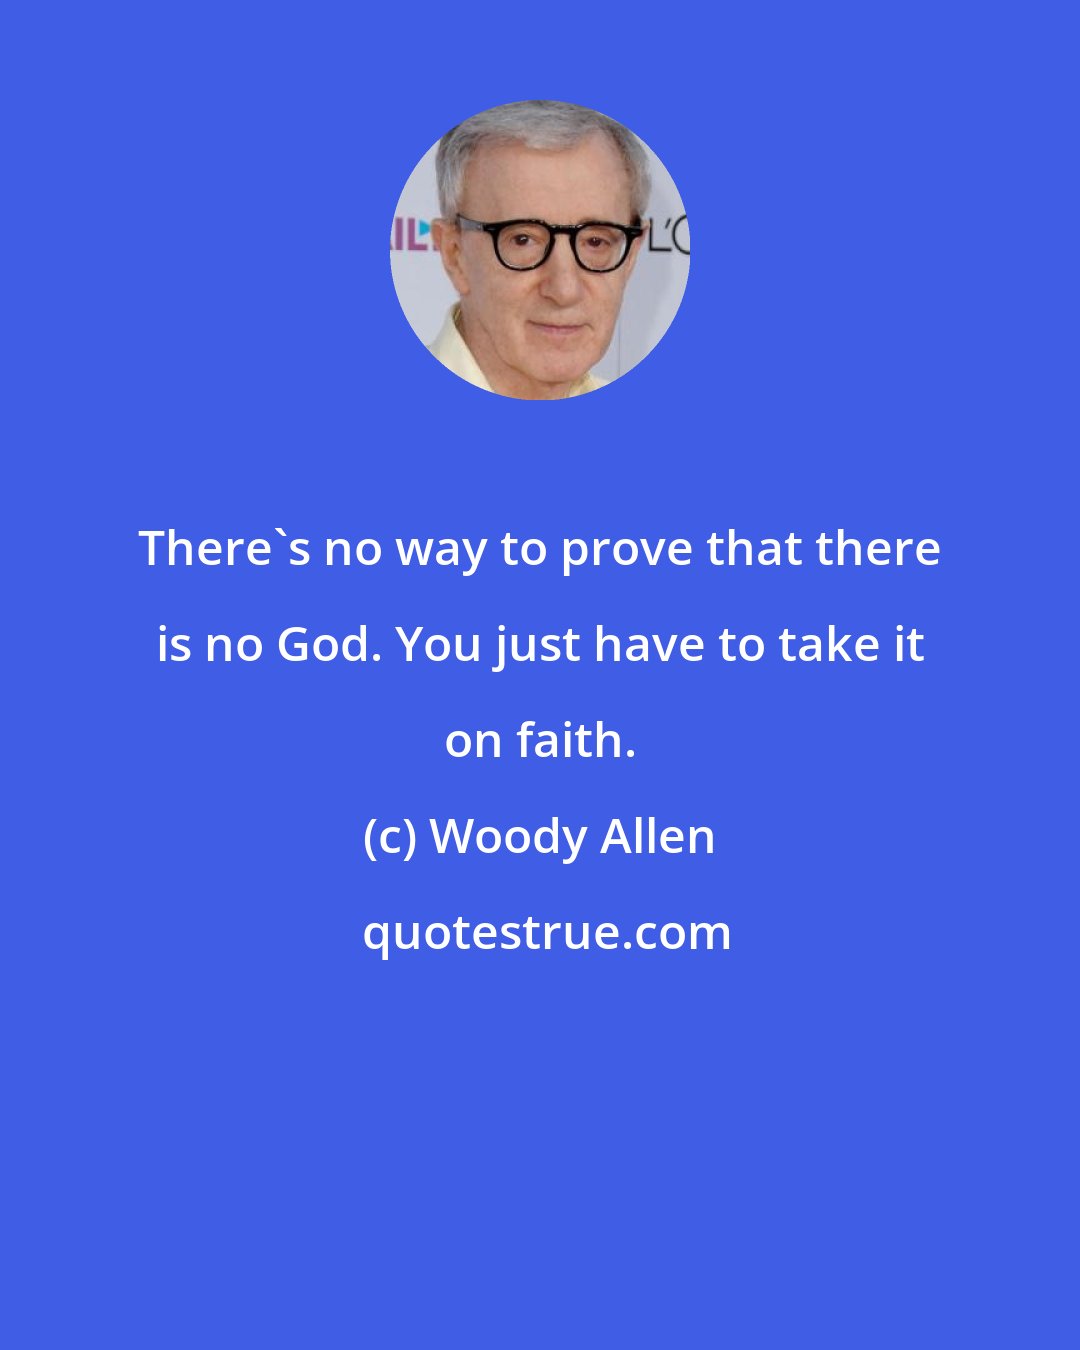 Woody Allen: There's no way to prove that there is no God. You just have to take it on faith.